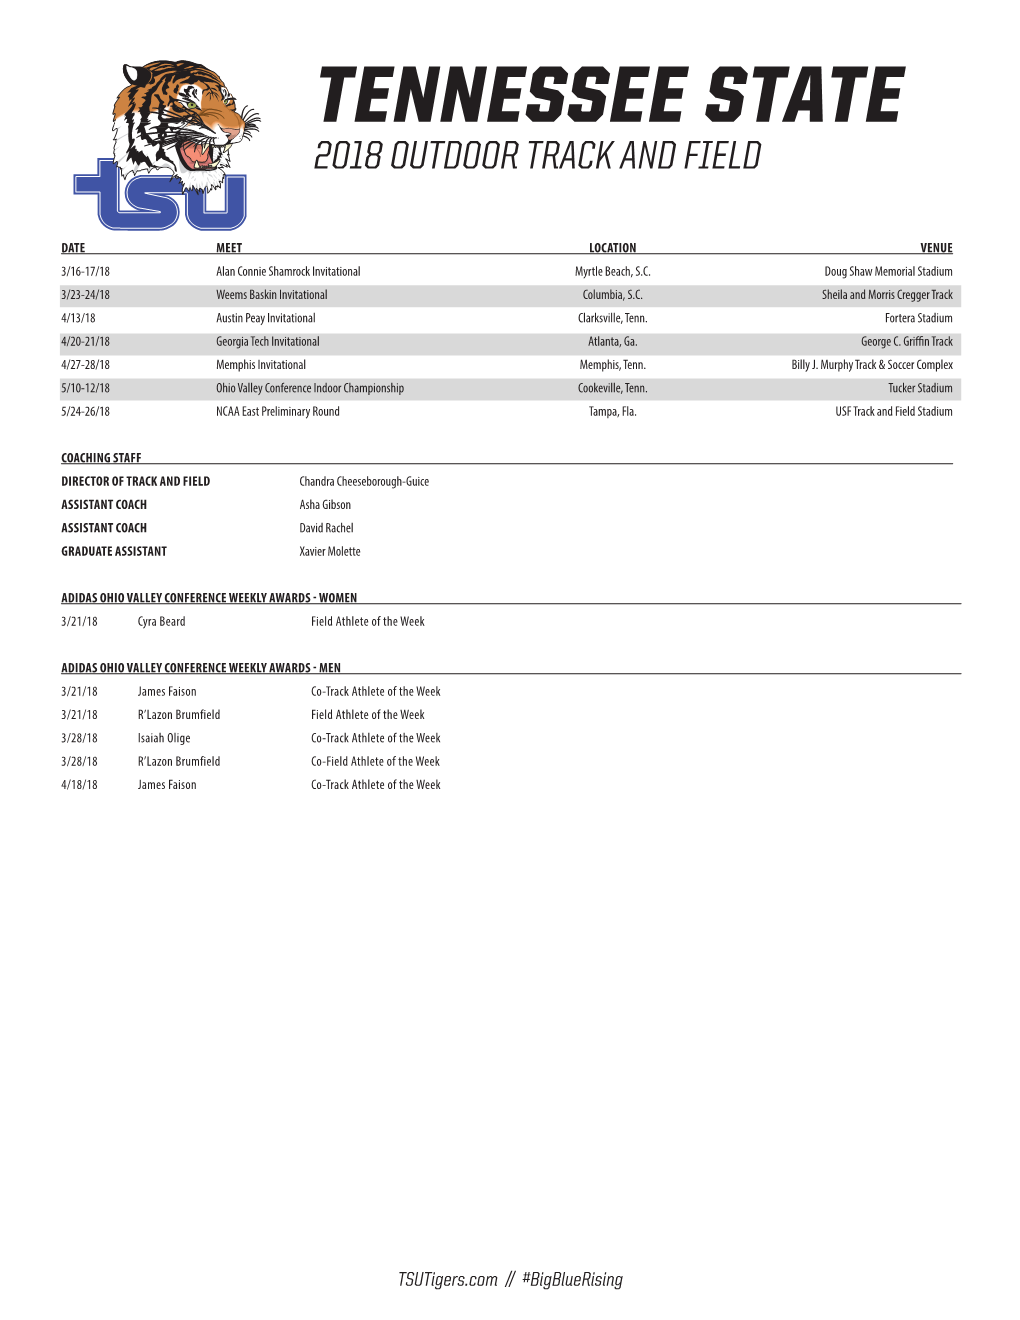 Tennessee State 2018 Outdoor Track and Field